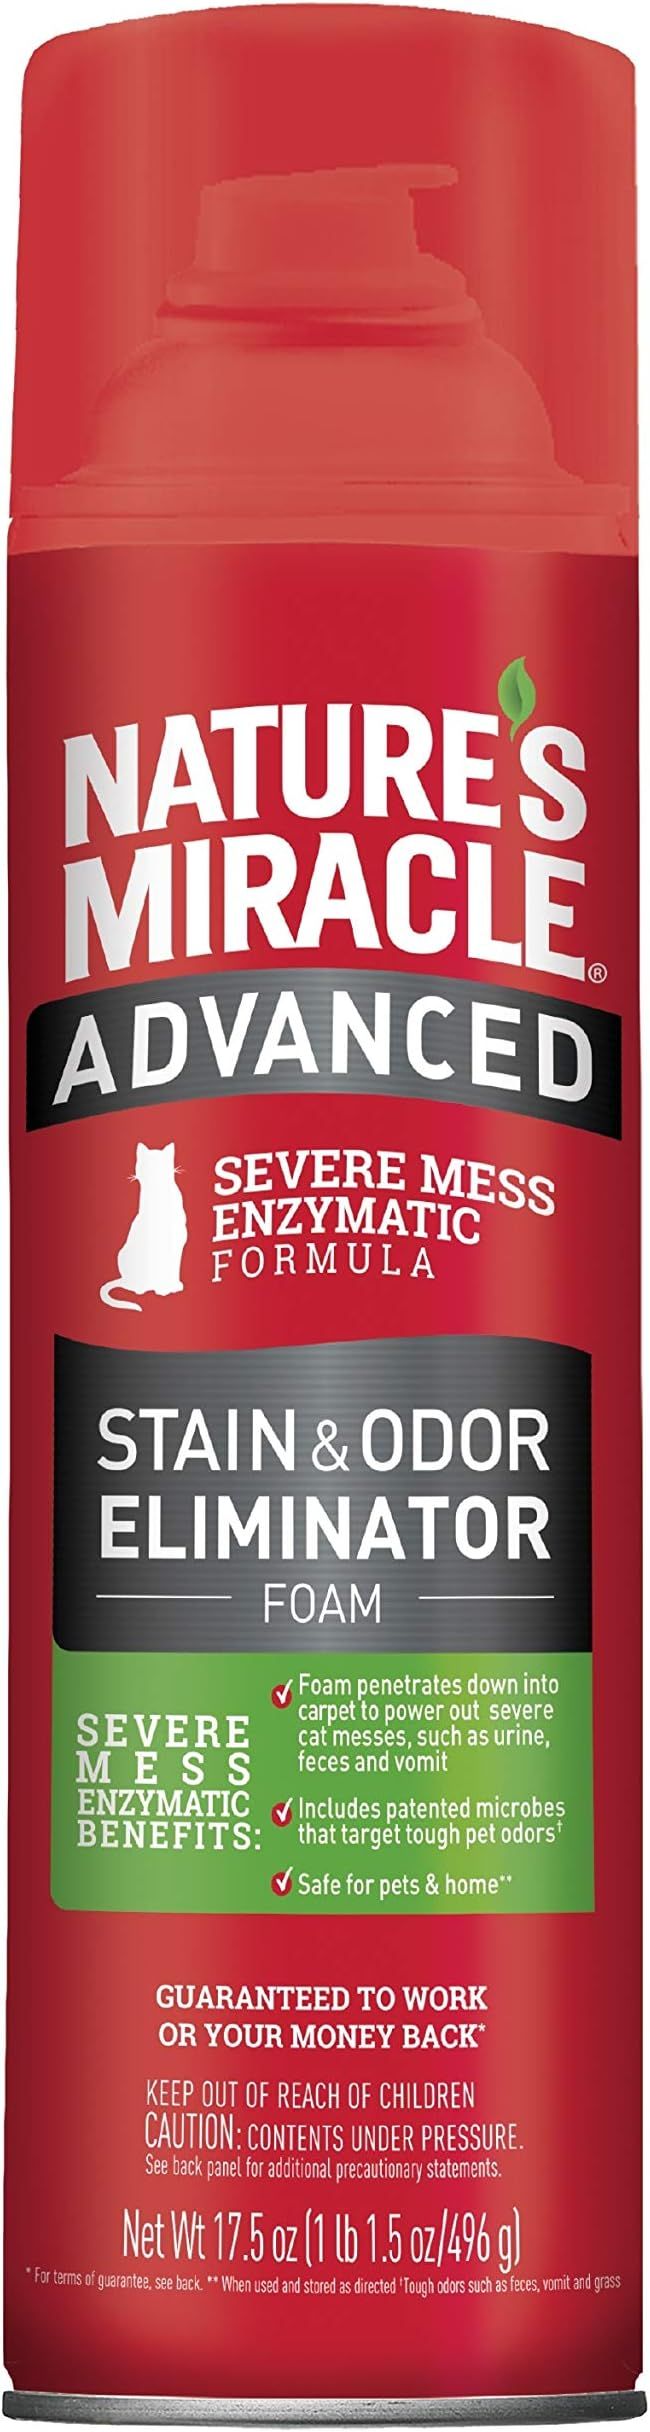 Nature's Miracle Advanced Stain and Odor Eliminator Foam Aerosol Sprays for Cats & Dogs | Amazon (US)